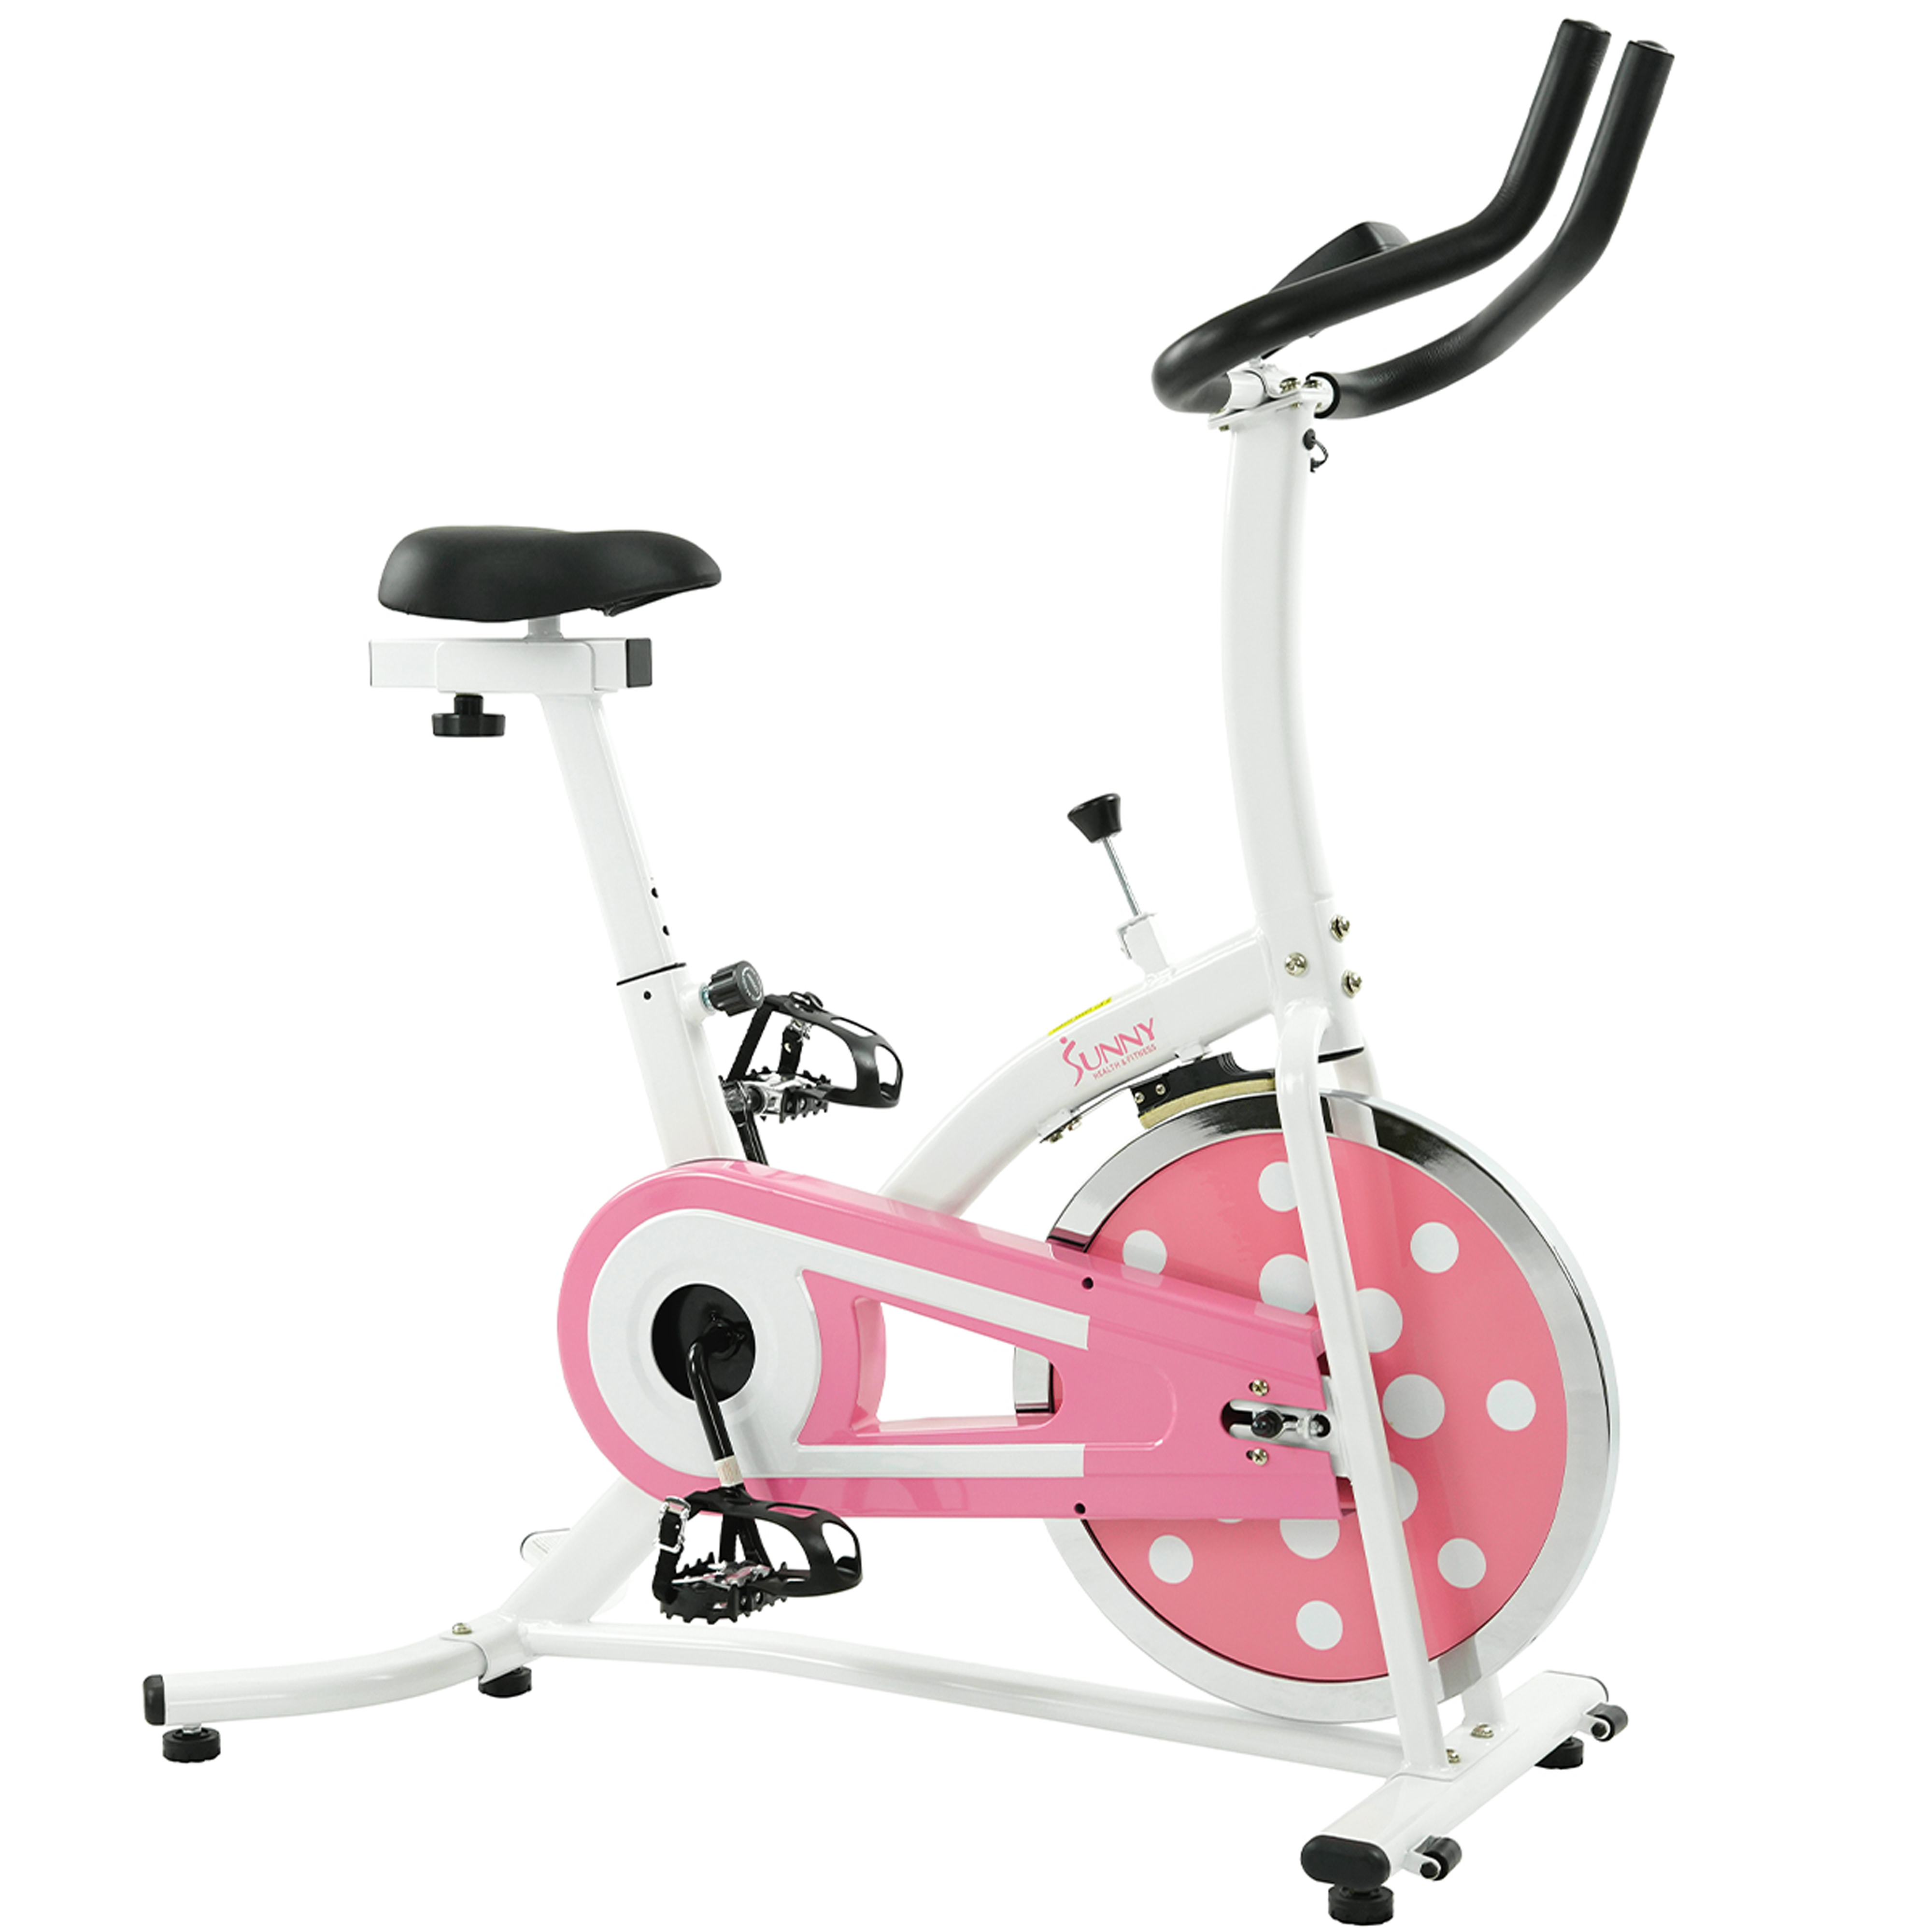 Sunny Health & Fitness Pink Chain Drive Indoor Cycling Exercise Stationary Bike w/ Monitor for Home Workout, Sport Training P8100 - image 3 of 8